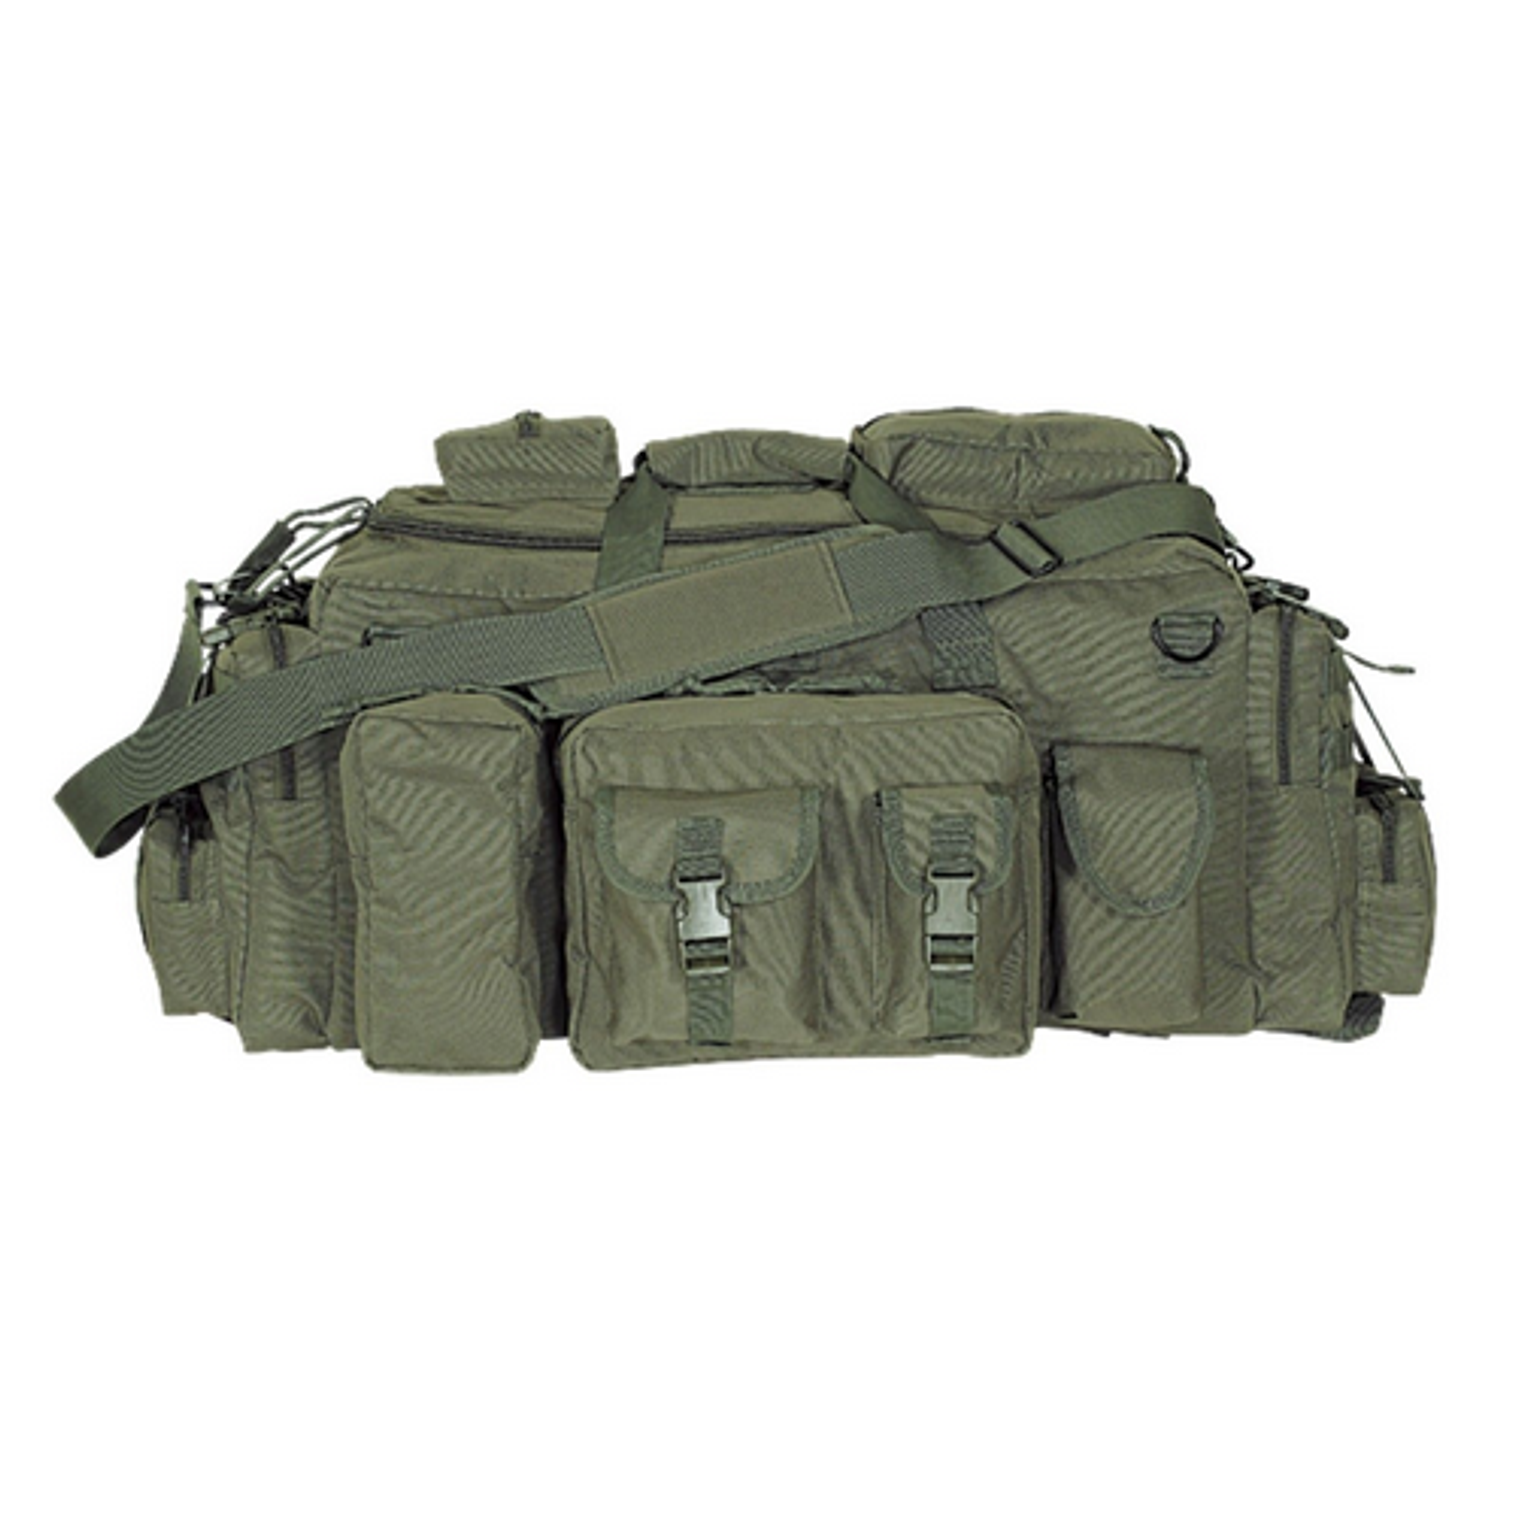 Mojo Load-out Bag W/ Backpack Straps